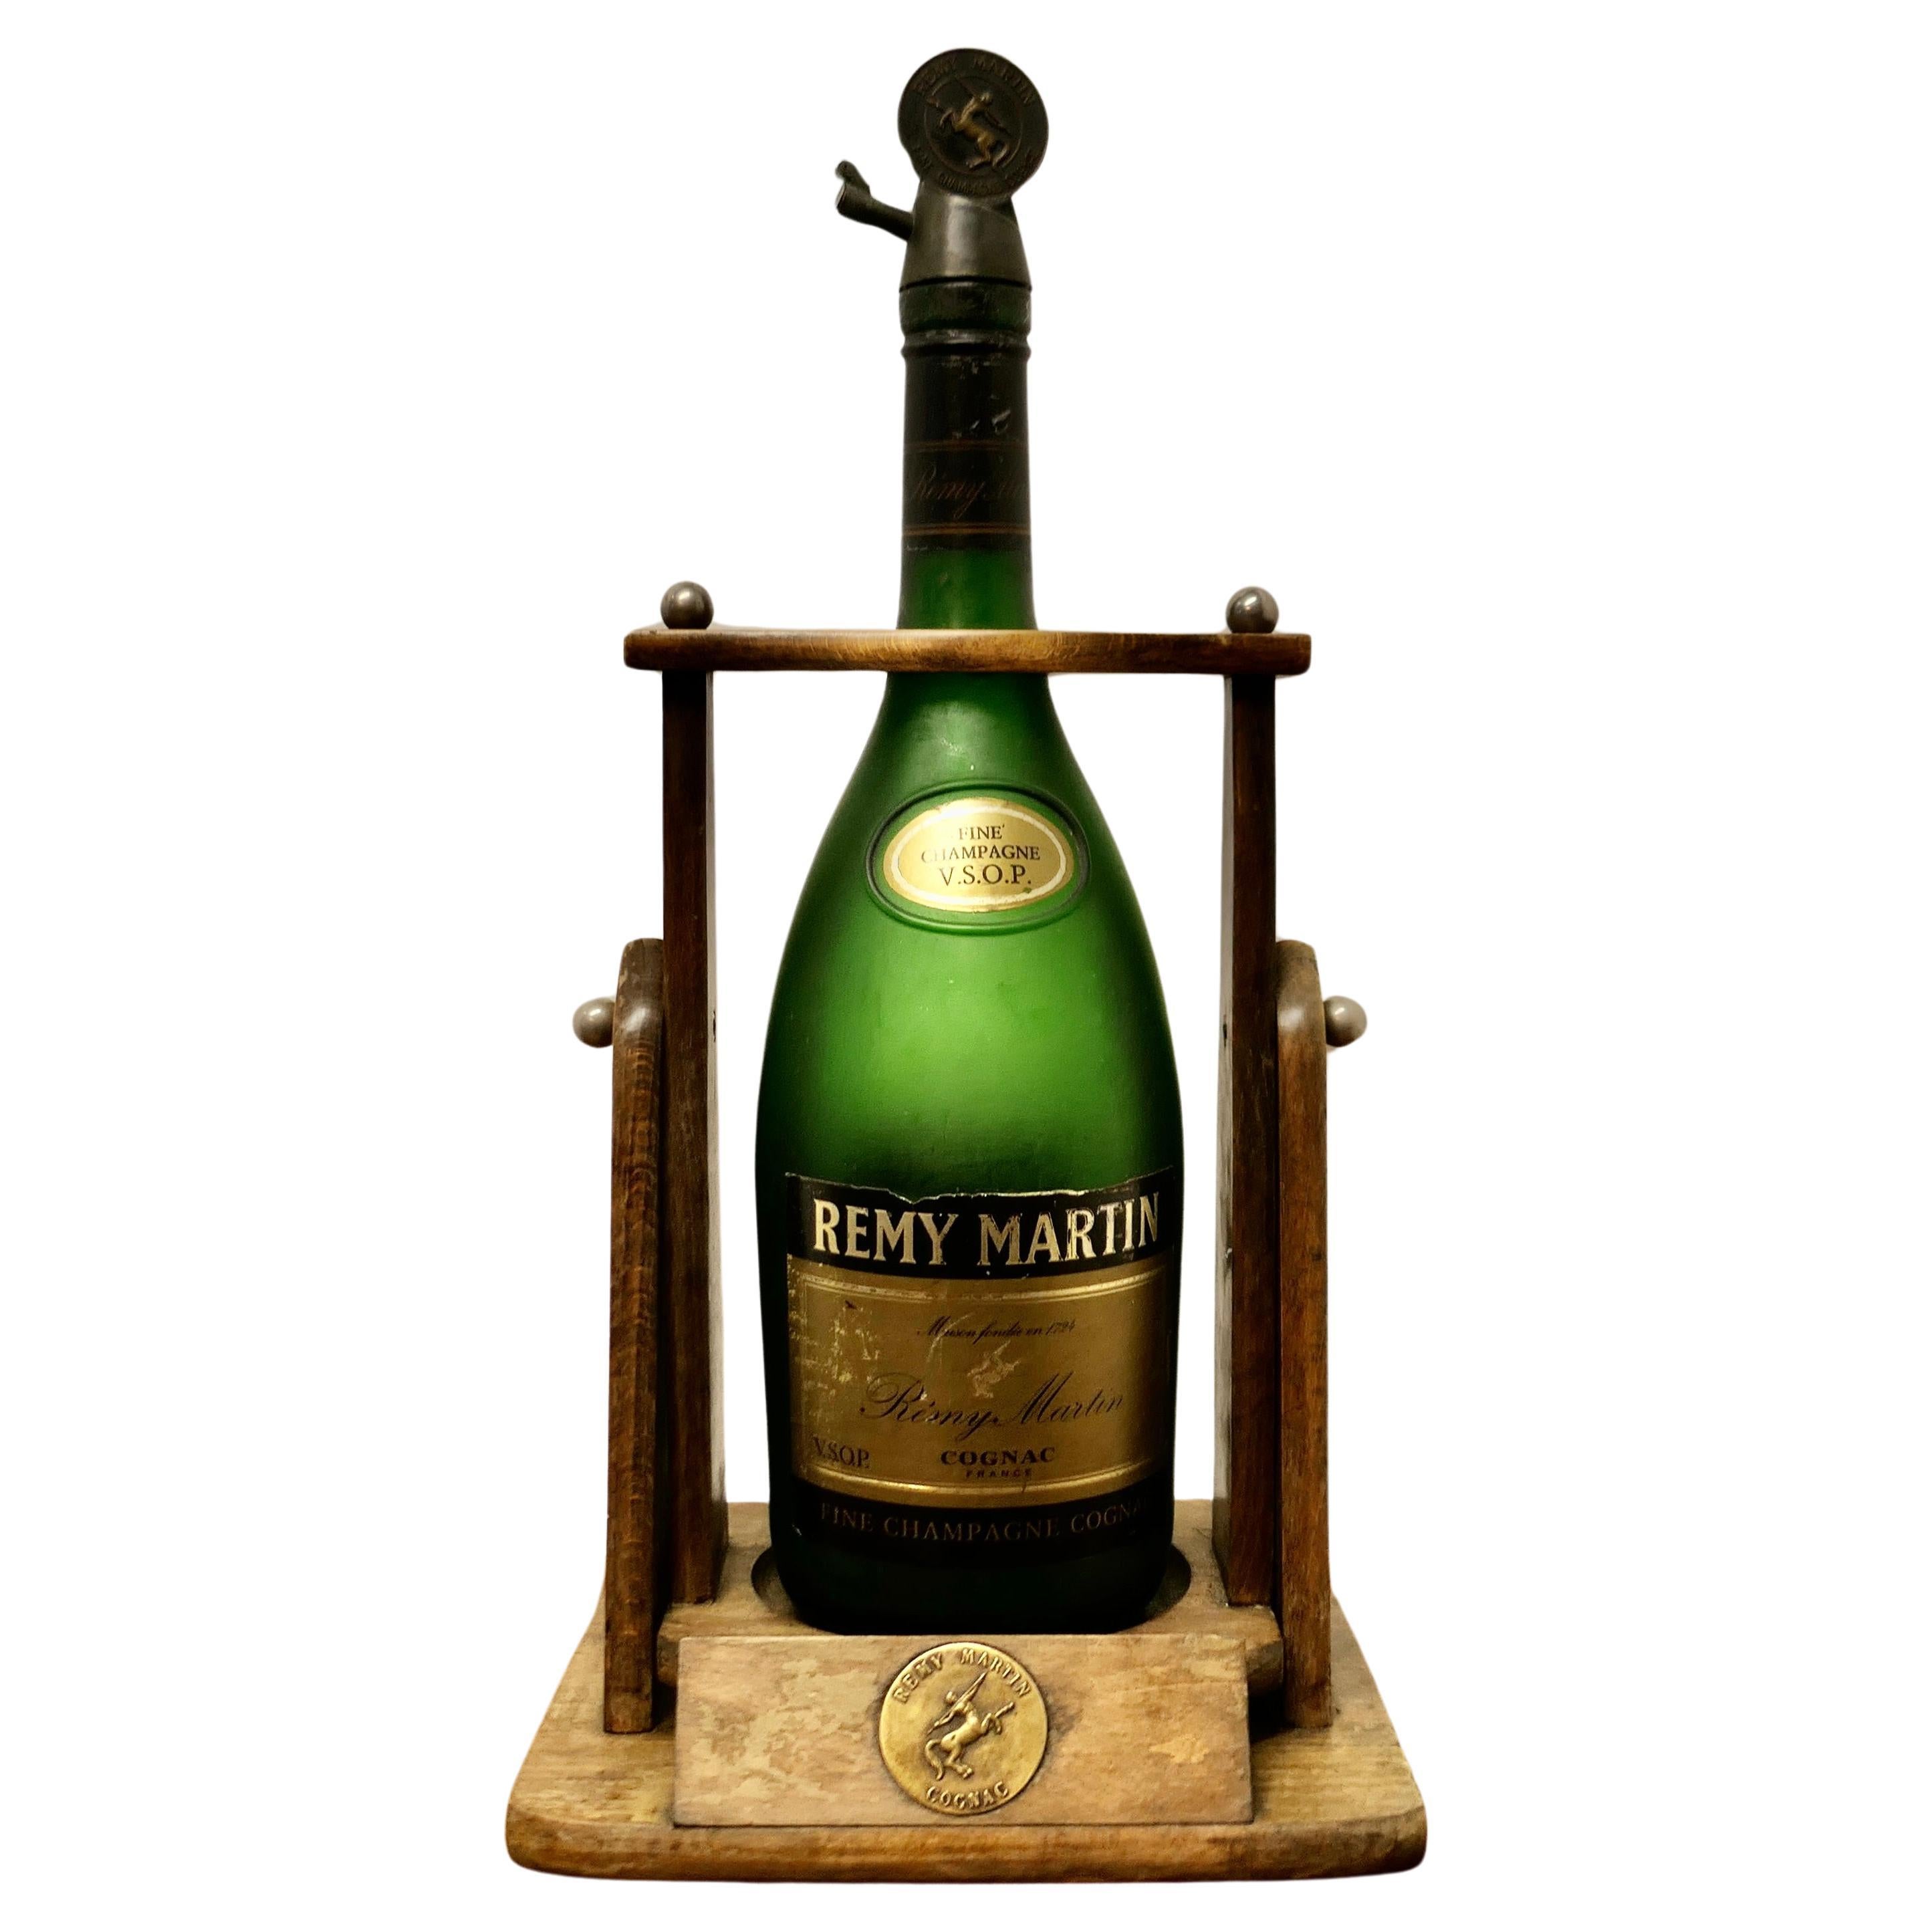 A Rare Vintage Remy Martin 3 Litre Bottle with Original Cradle Pouring Stand   For Sale